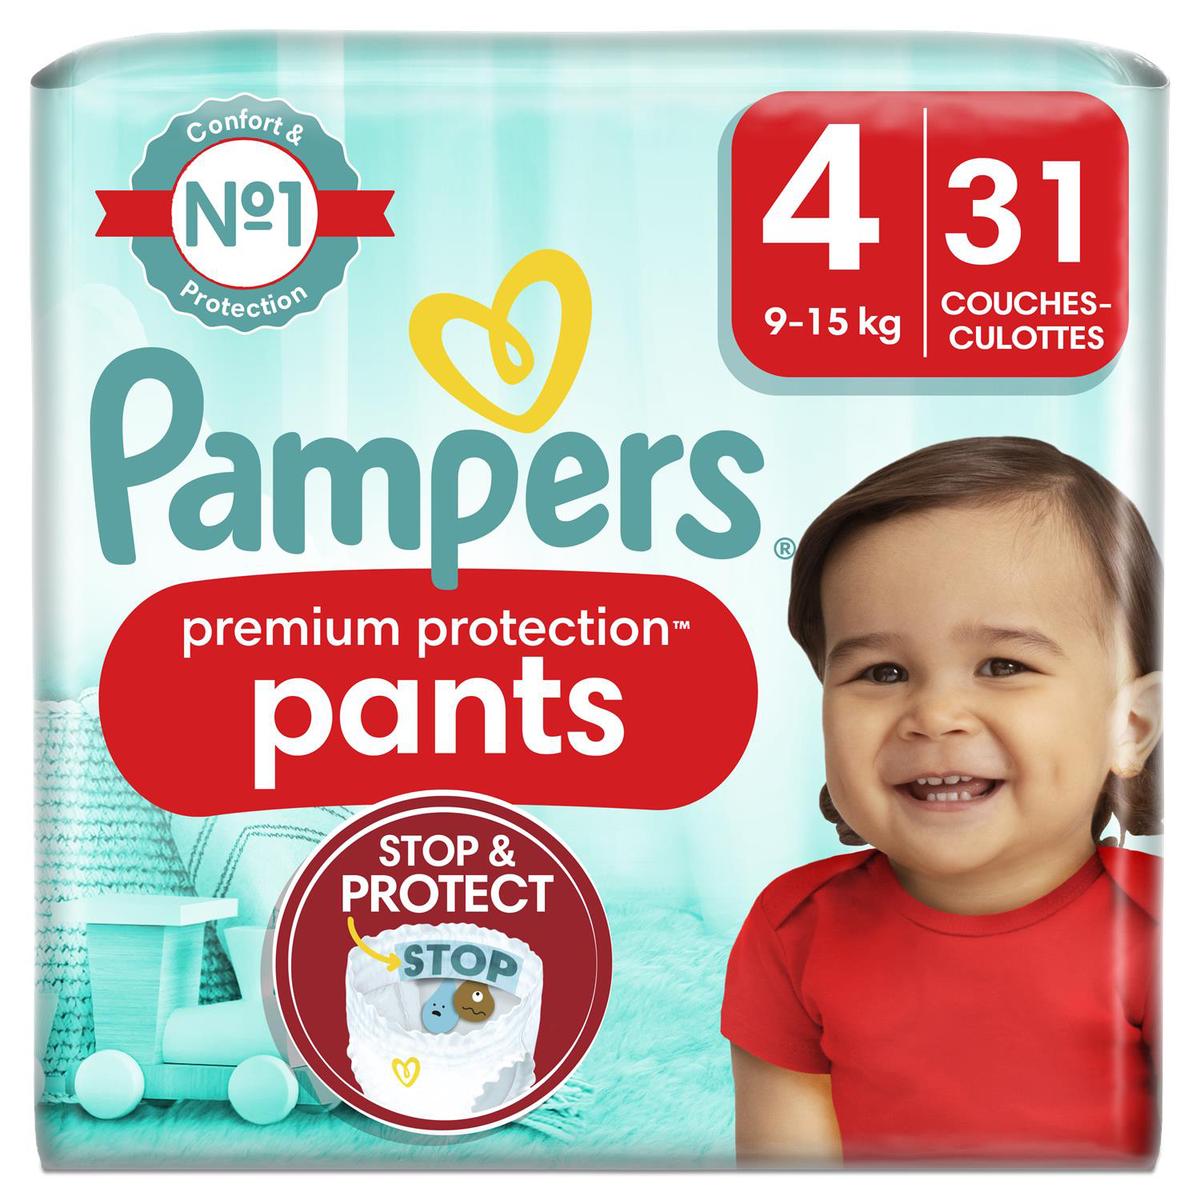 Pampers Premium Protection Pants Couches culottes T6 +15kg, 62